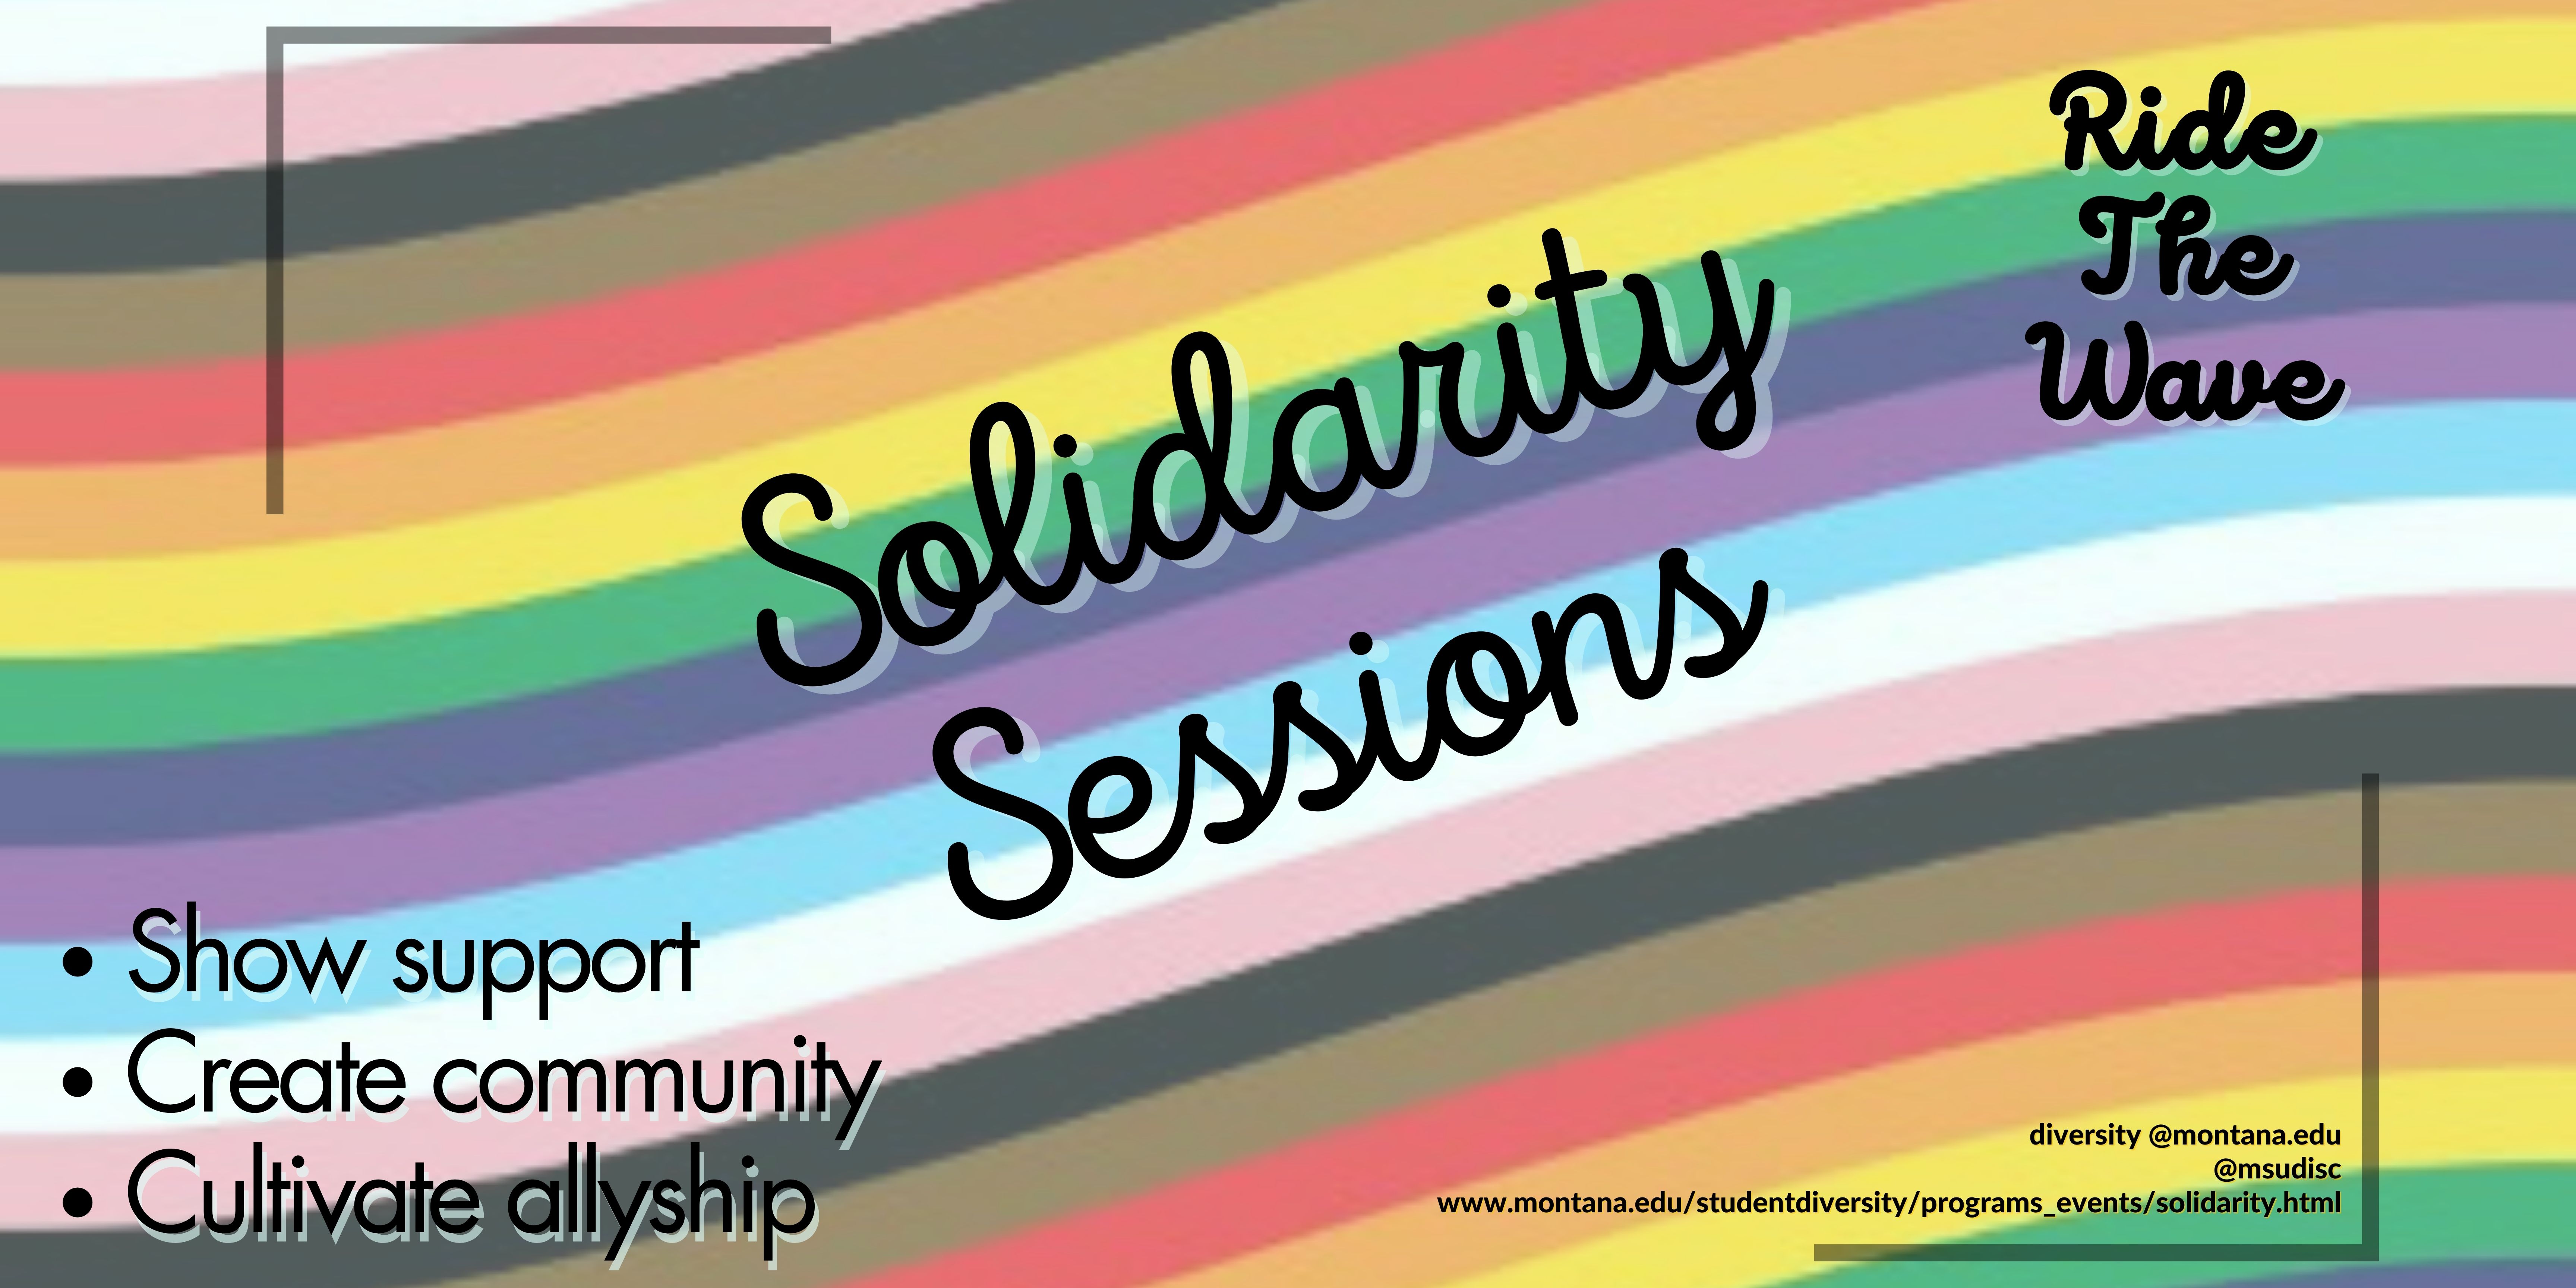 Solidarity Sessions, Ride the Wave. Show support, create community, cultivate allyship.  Wavy progress flag.